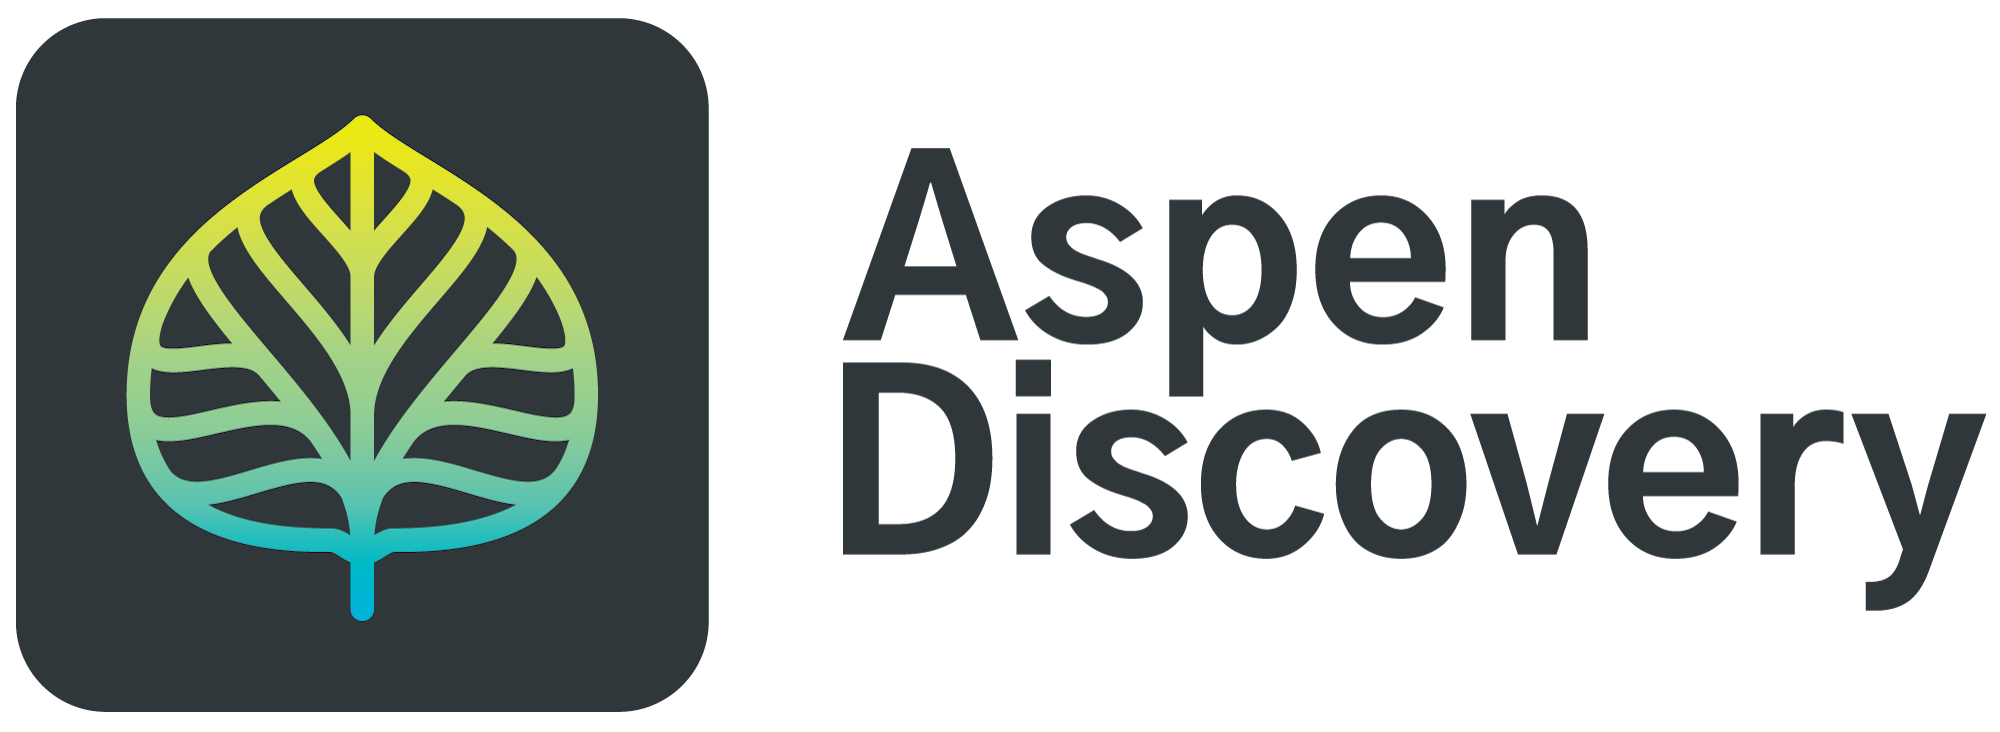 The Aspen Discovery logo, a simple leaf line drawing. the leaf is a gradient from blue to yellow on a charcoal grey background. 